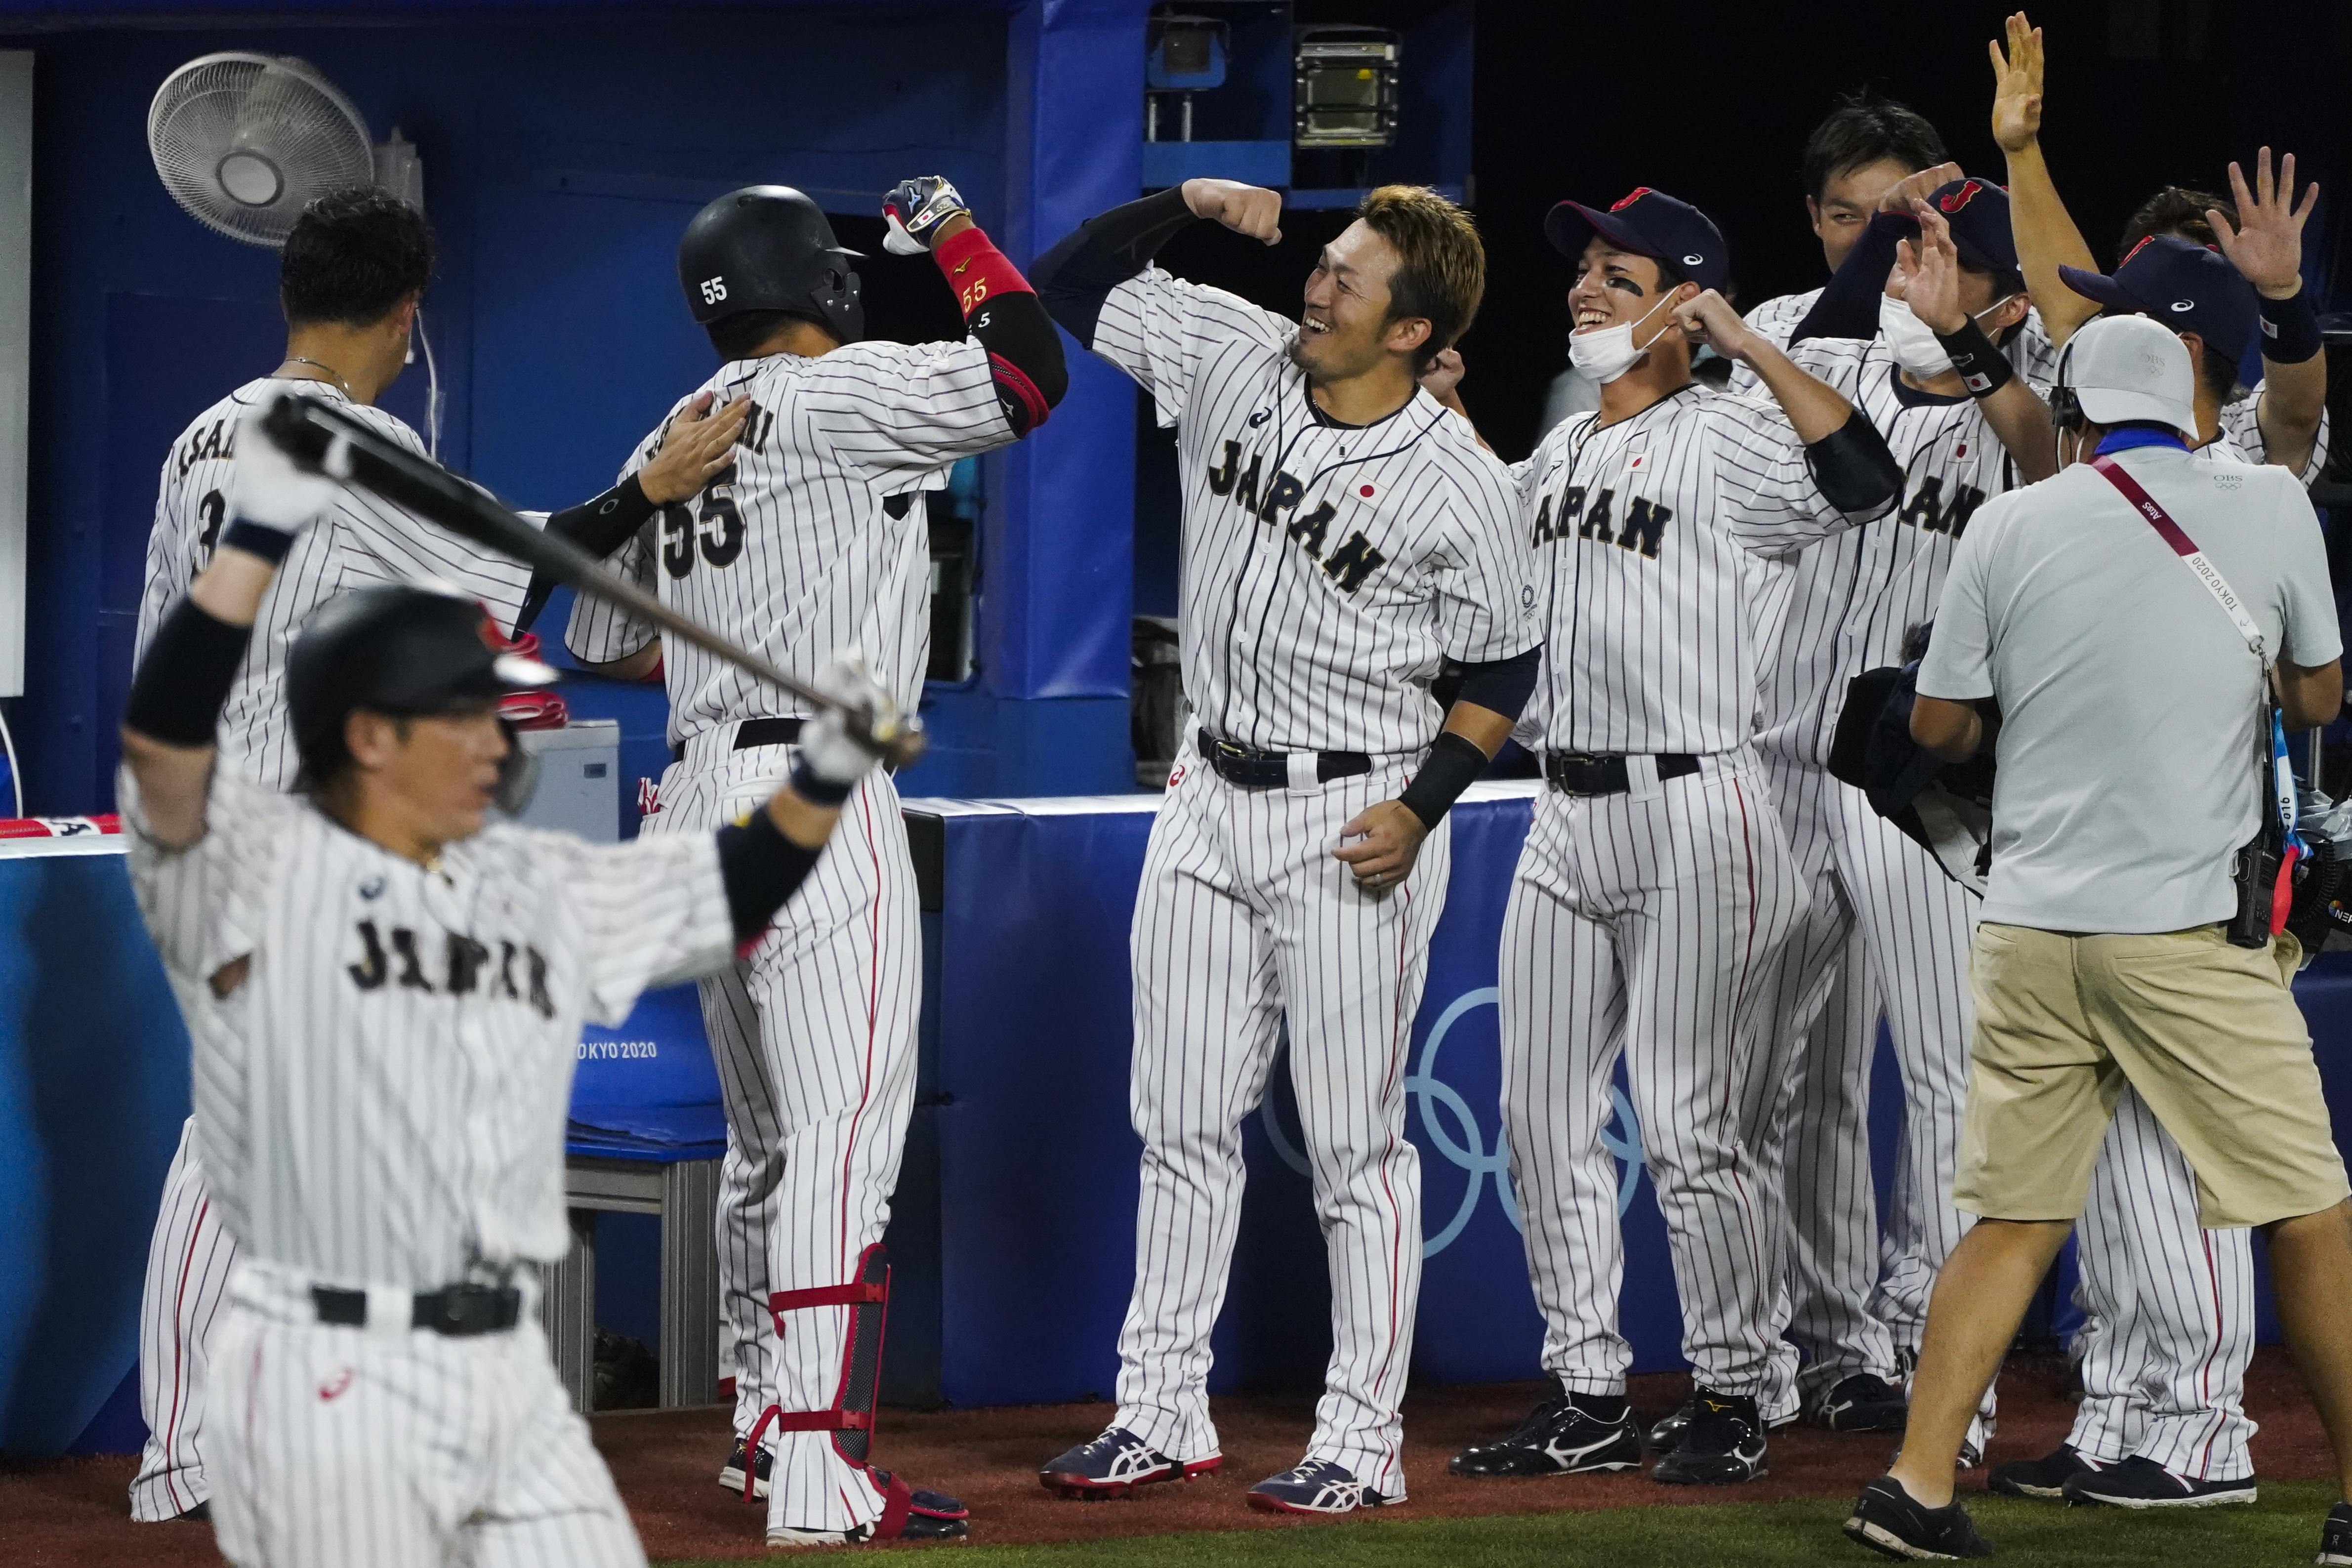 Japan Brings Home the Gold Medal in Baseball, a National Passion - The New  York Times